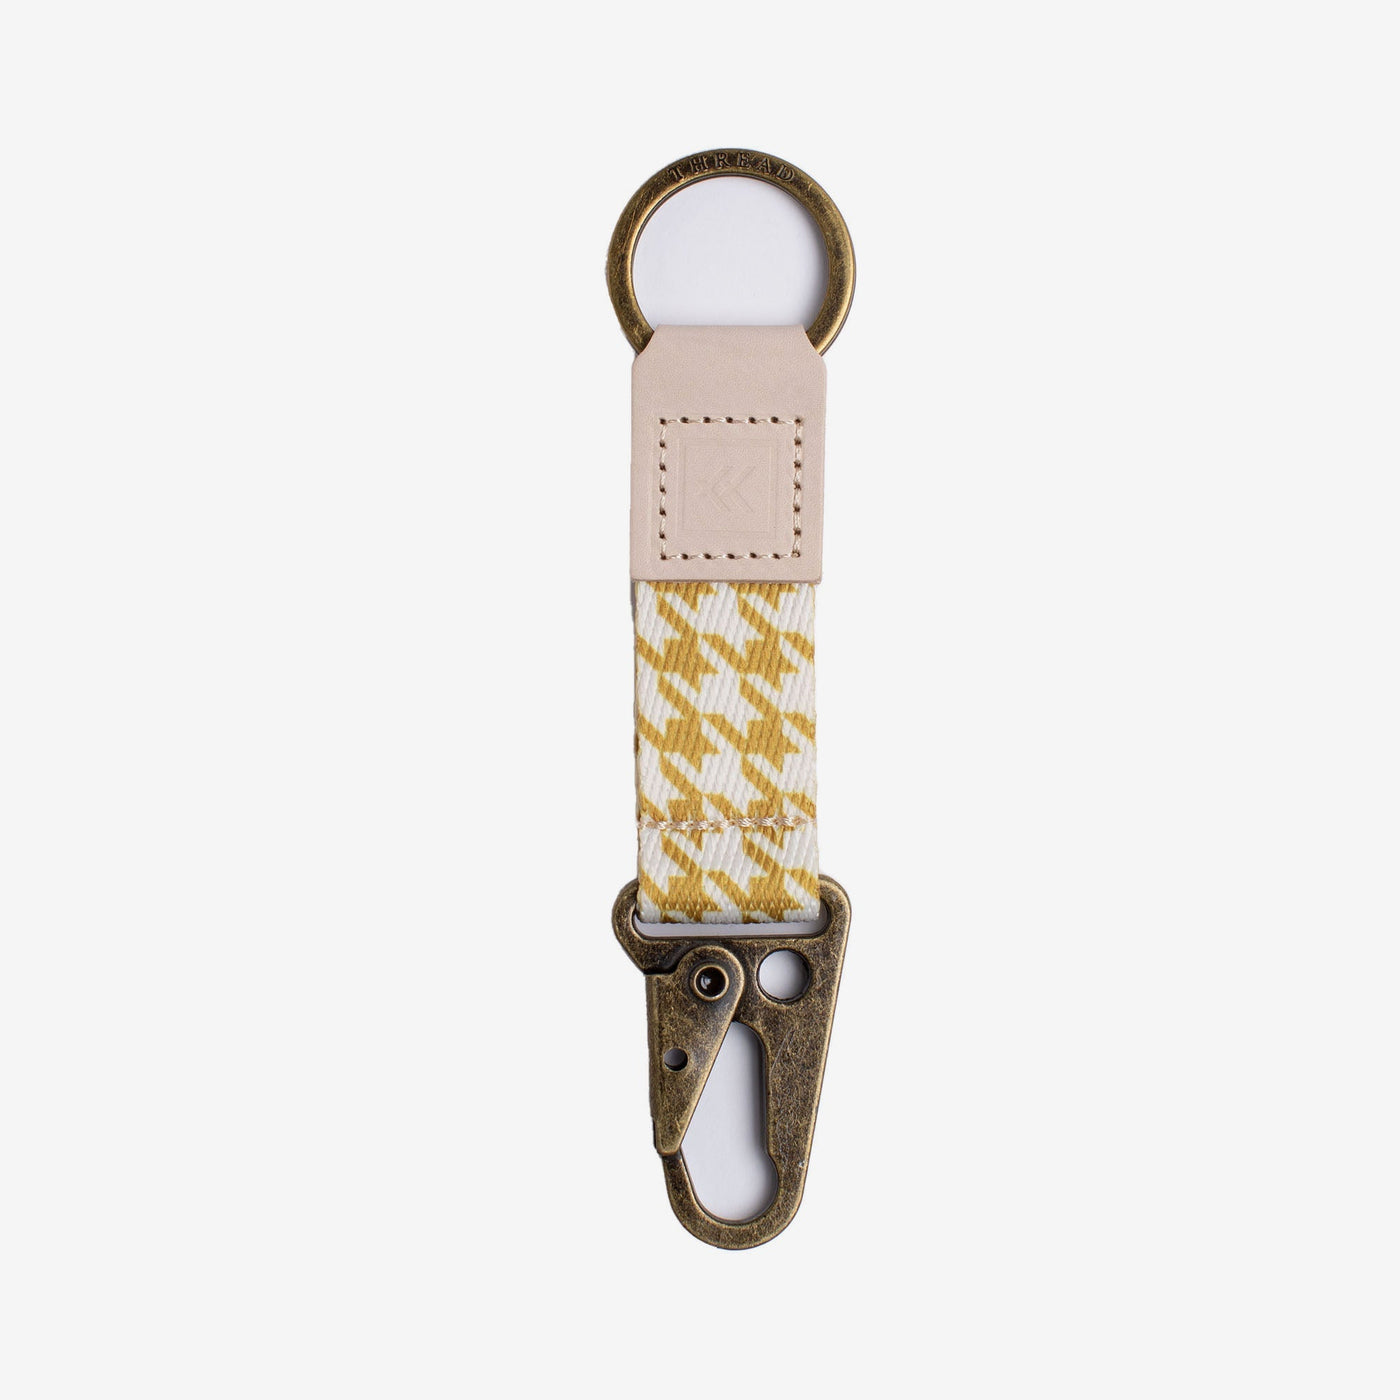 Gold and white houndstooth keychain clip